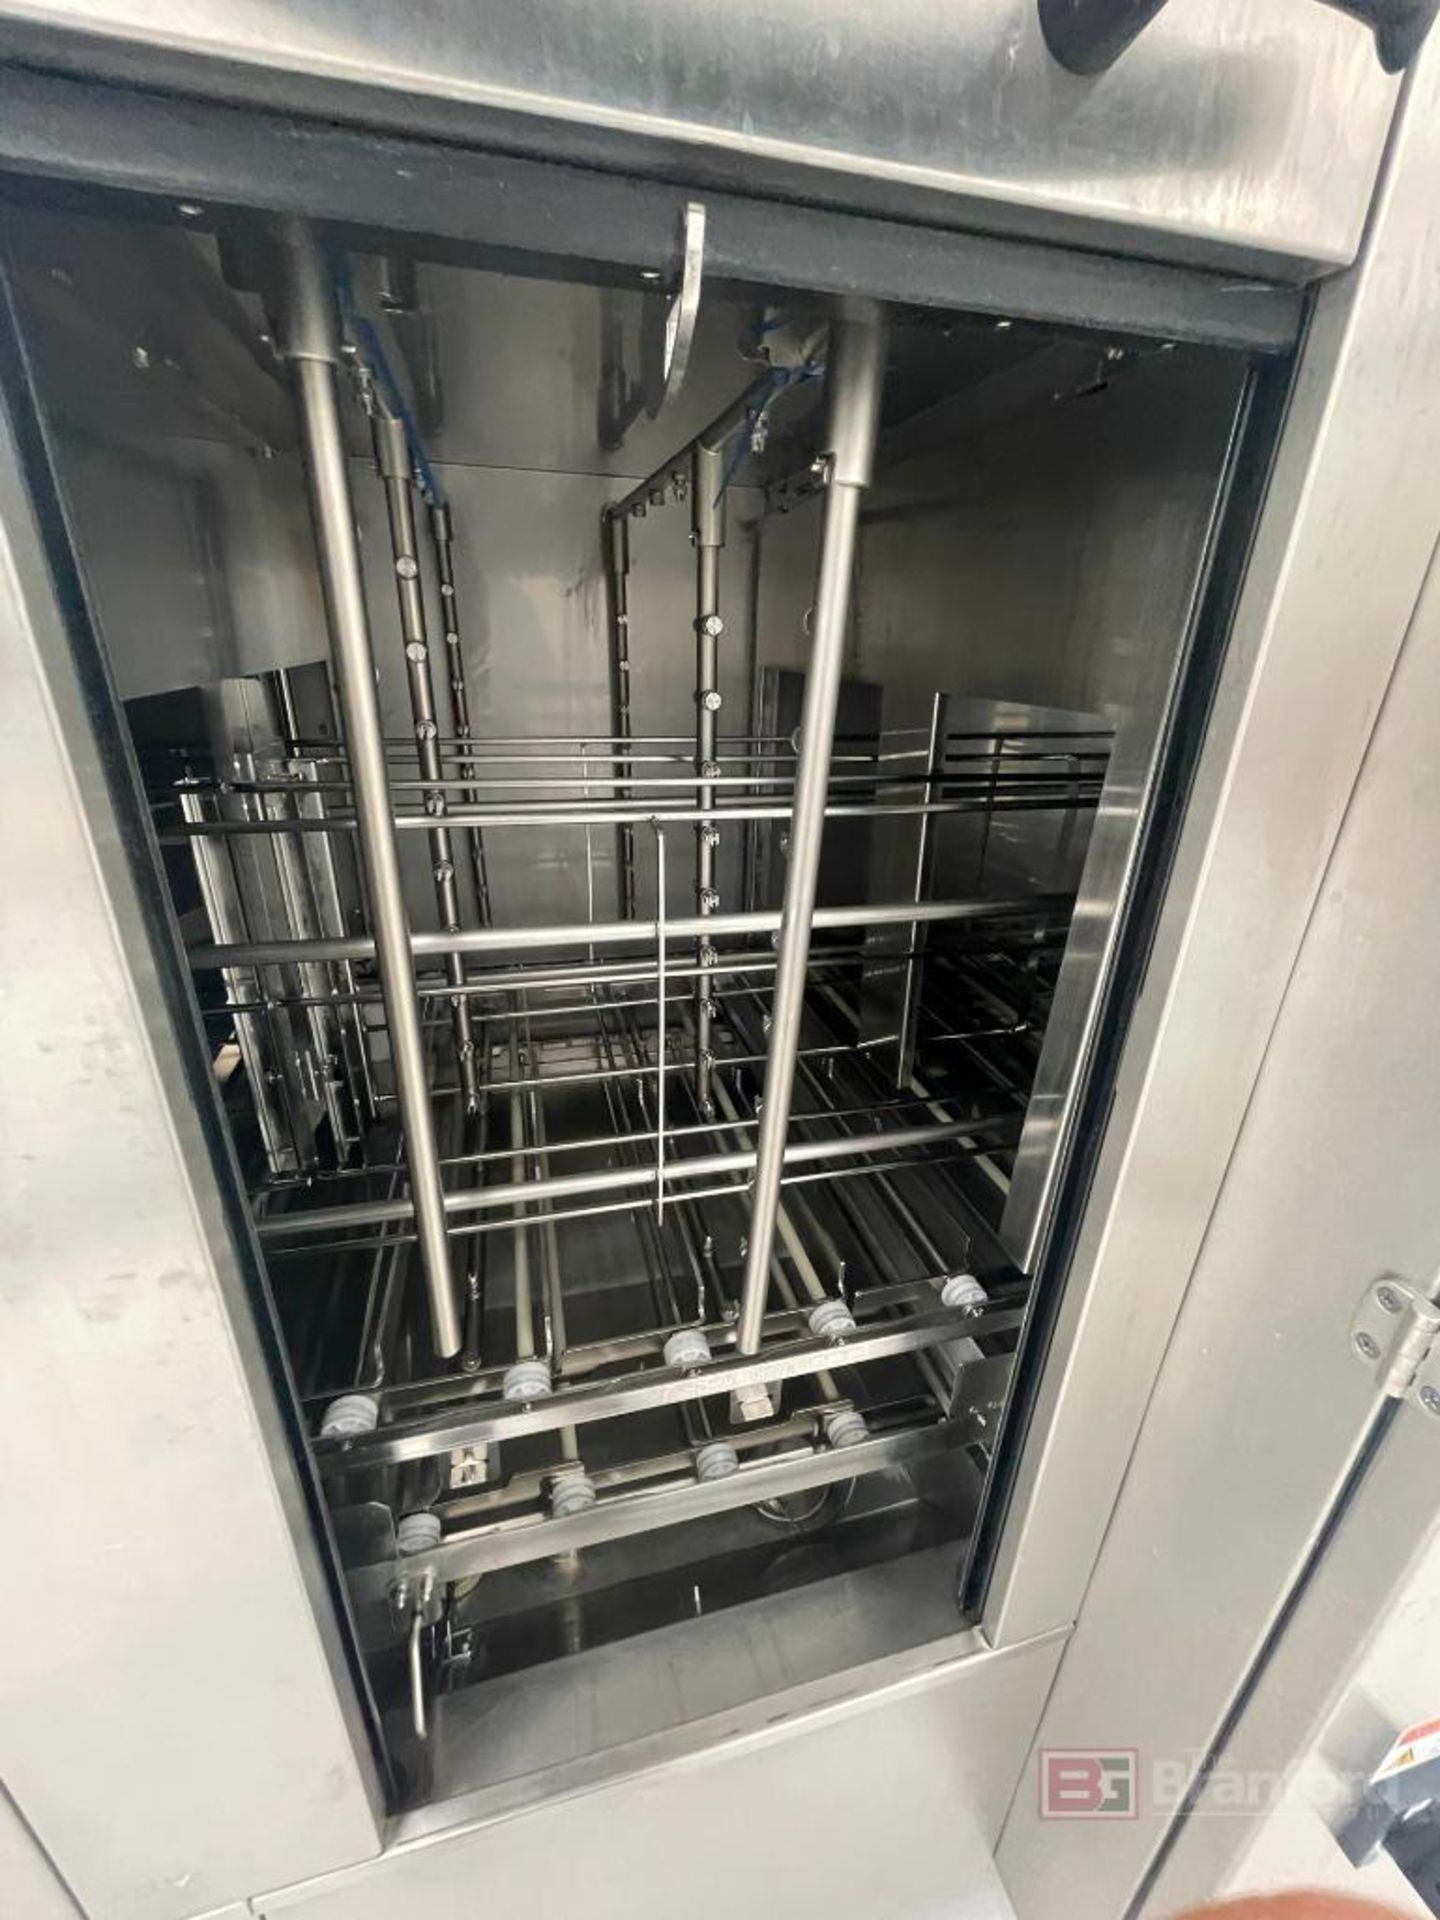 2020 Hildebrand Stainless Steel Steam Tray Washing System - Image 4 of 13